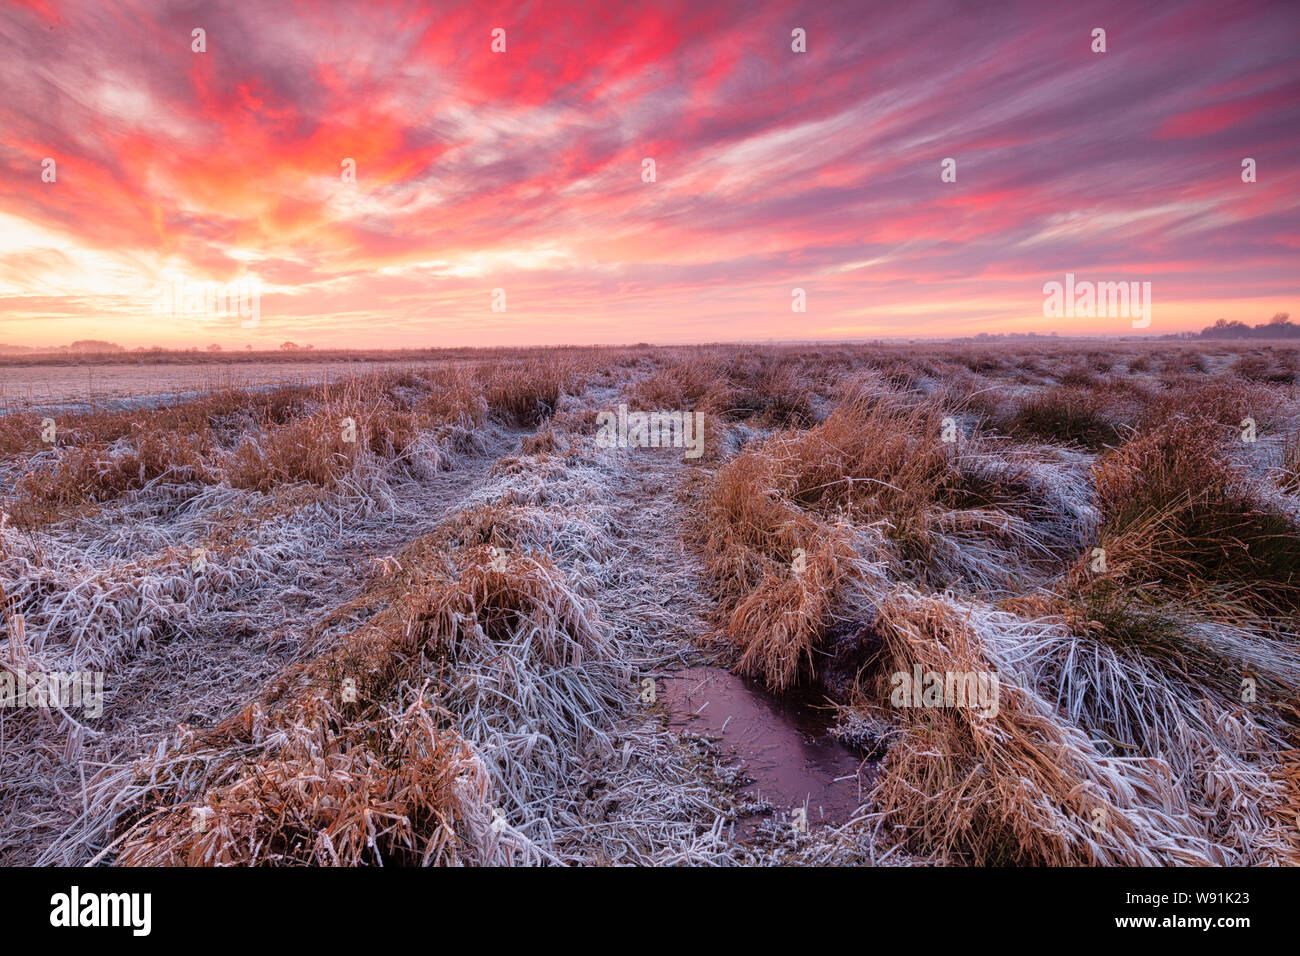 a spectacular winter sunset over a field with snow in nature - Winter landscape image - Groningen, The Netherlands Stock Photo